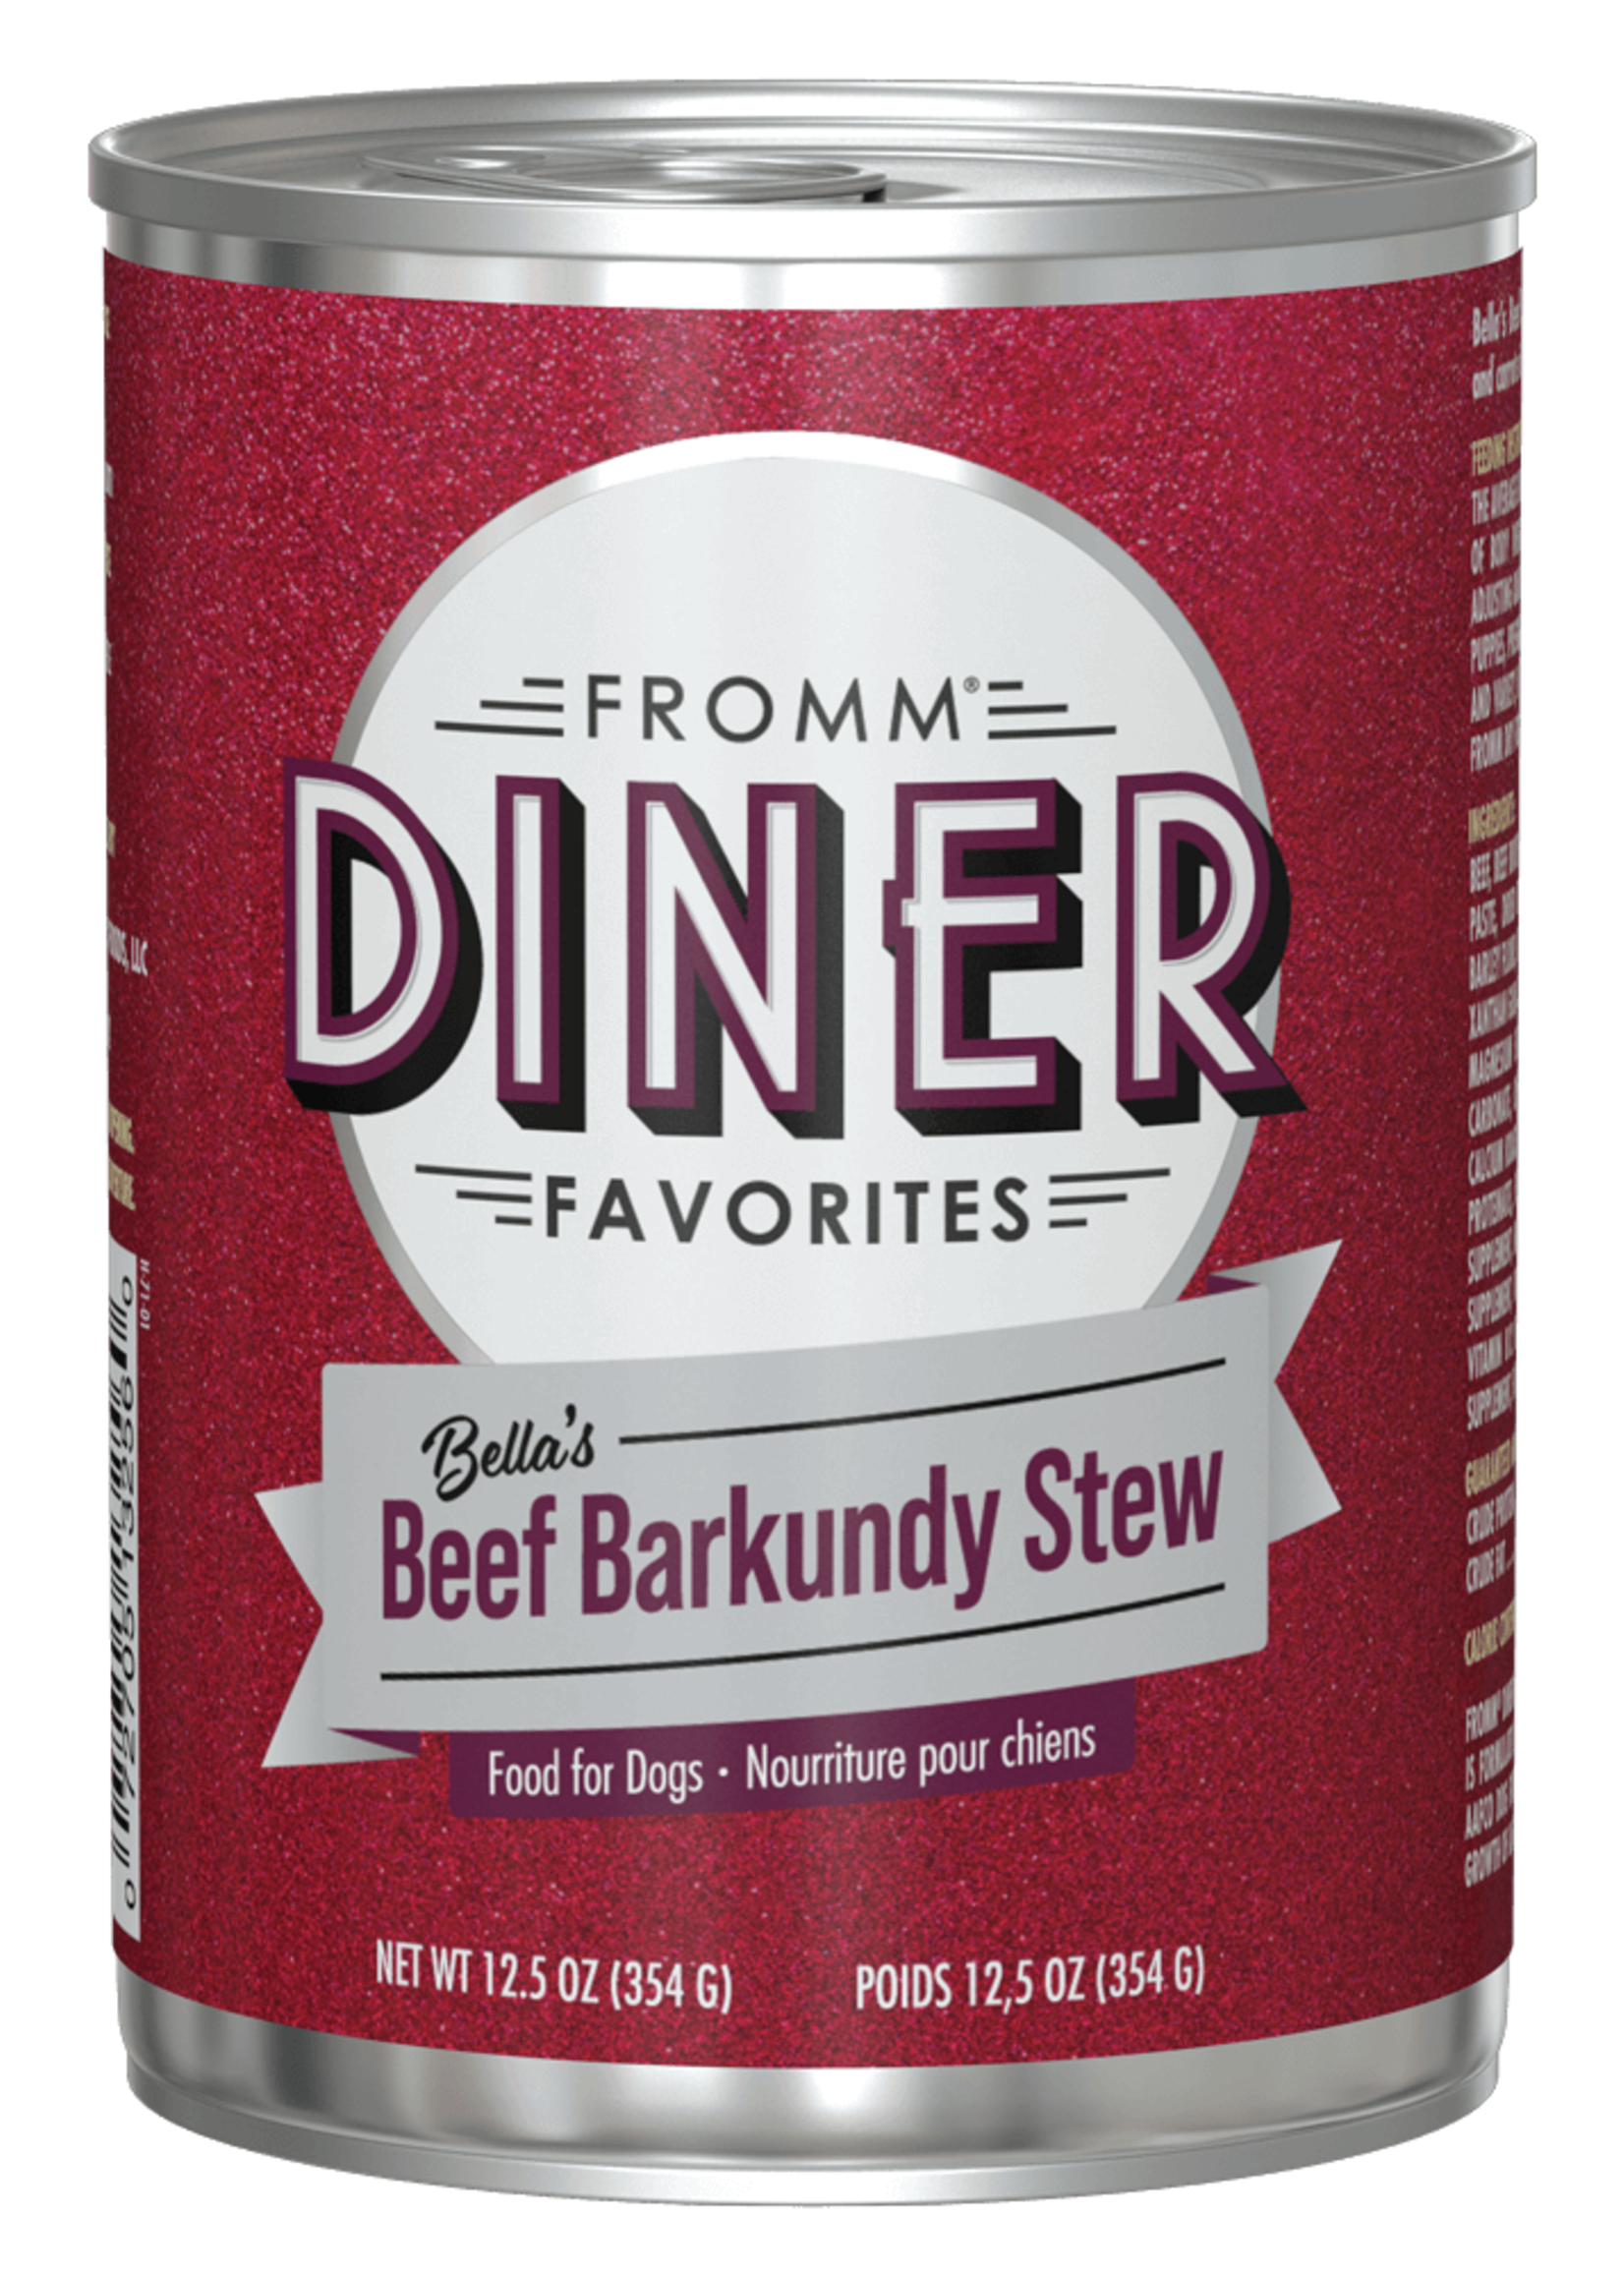 Fromm Family Pet Food Fromm Dog Diner Favorites Bella's Beef Barkundy Stew 12.5 oz single